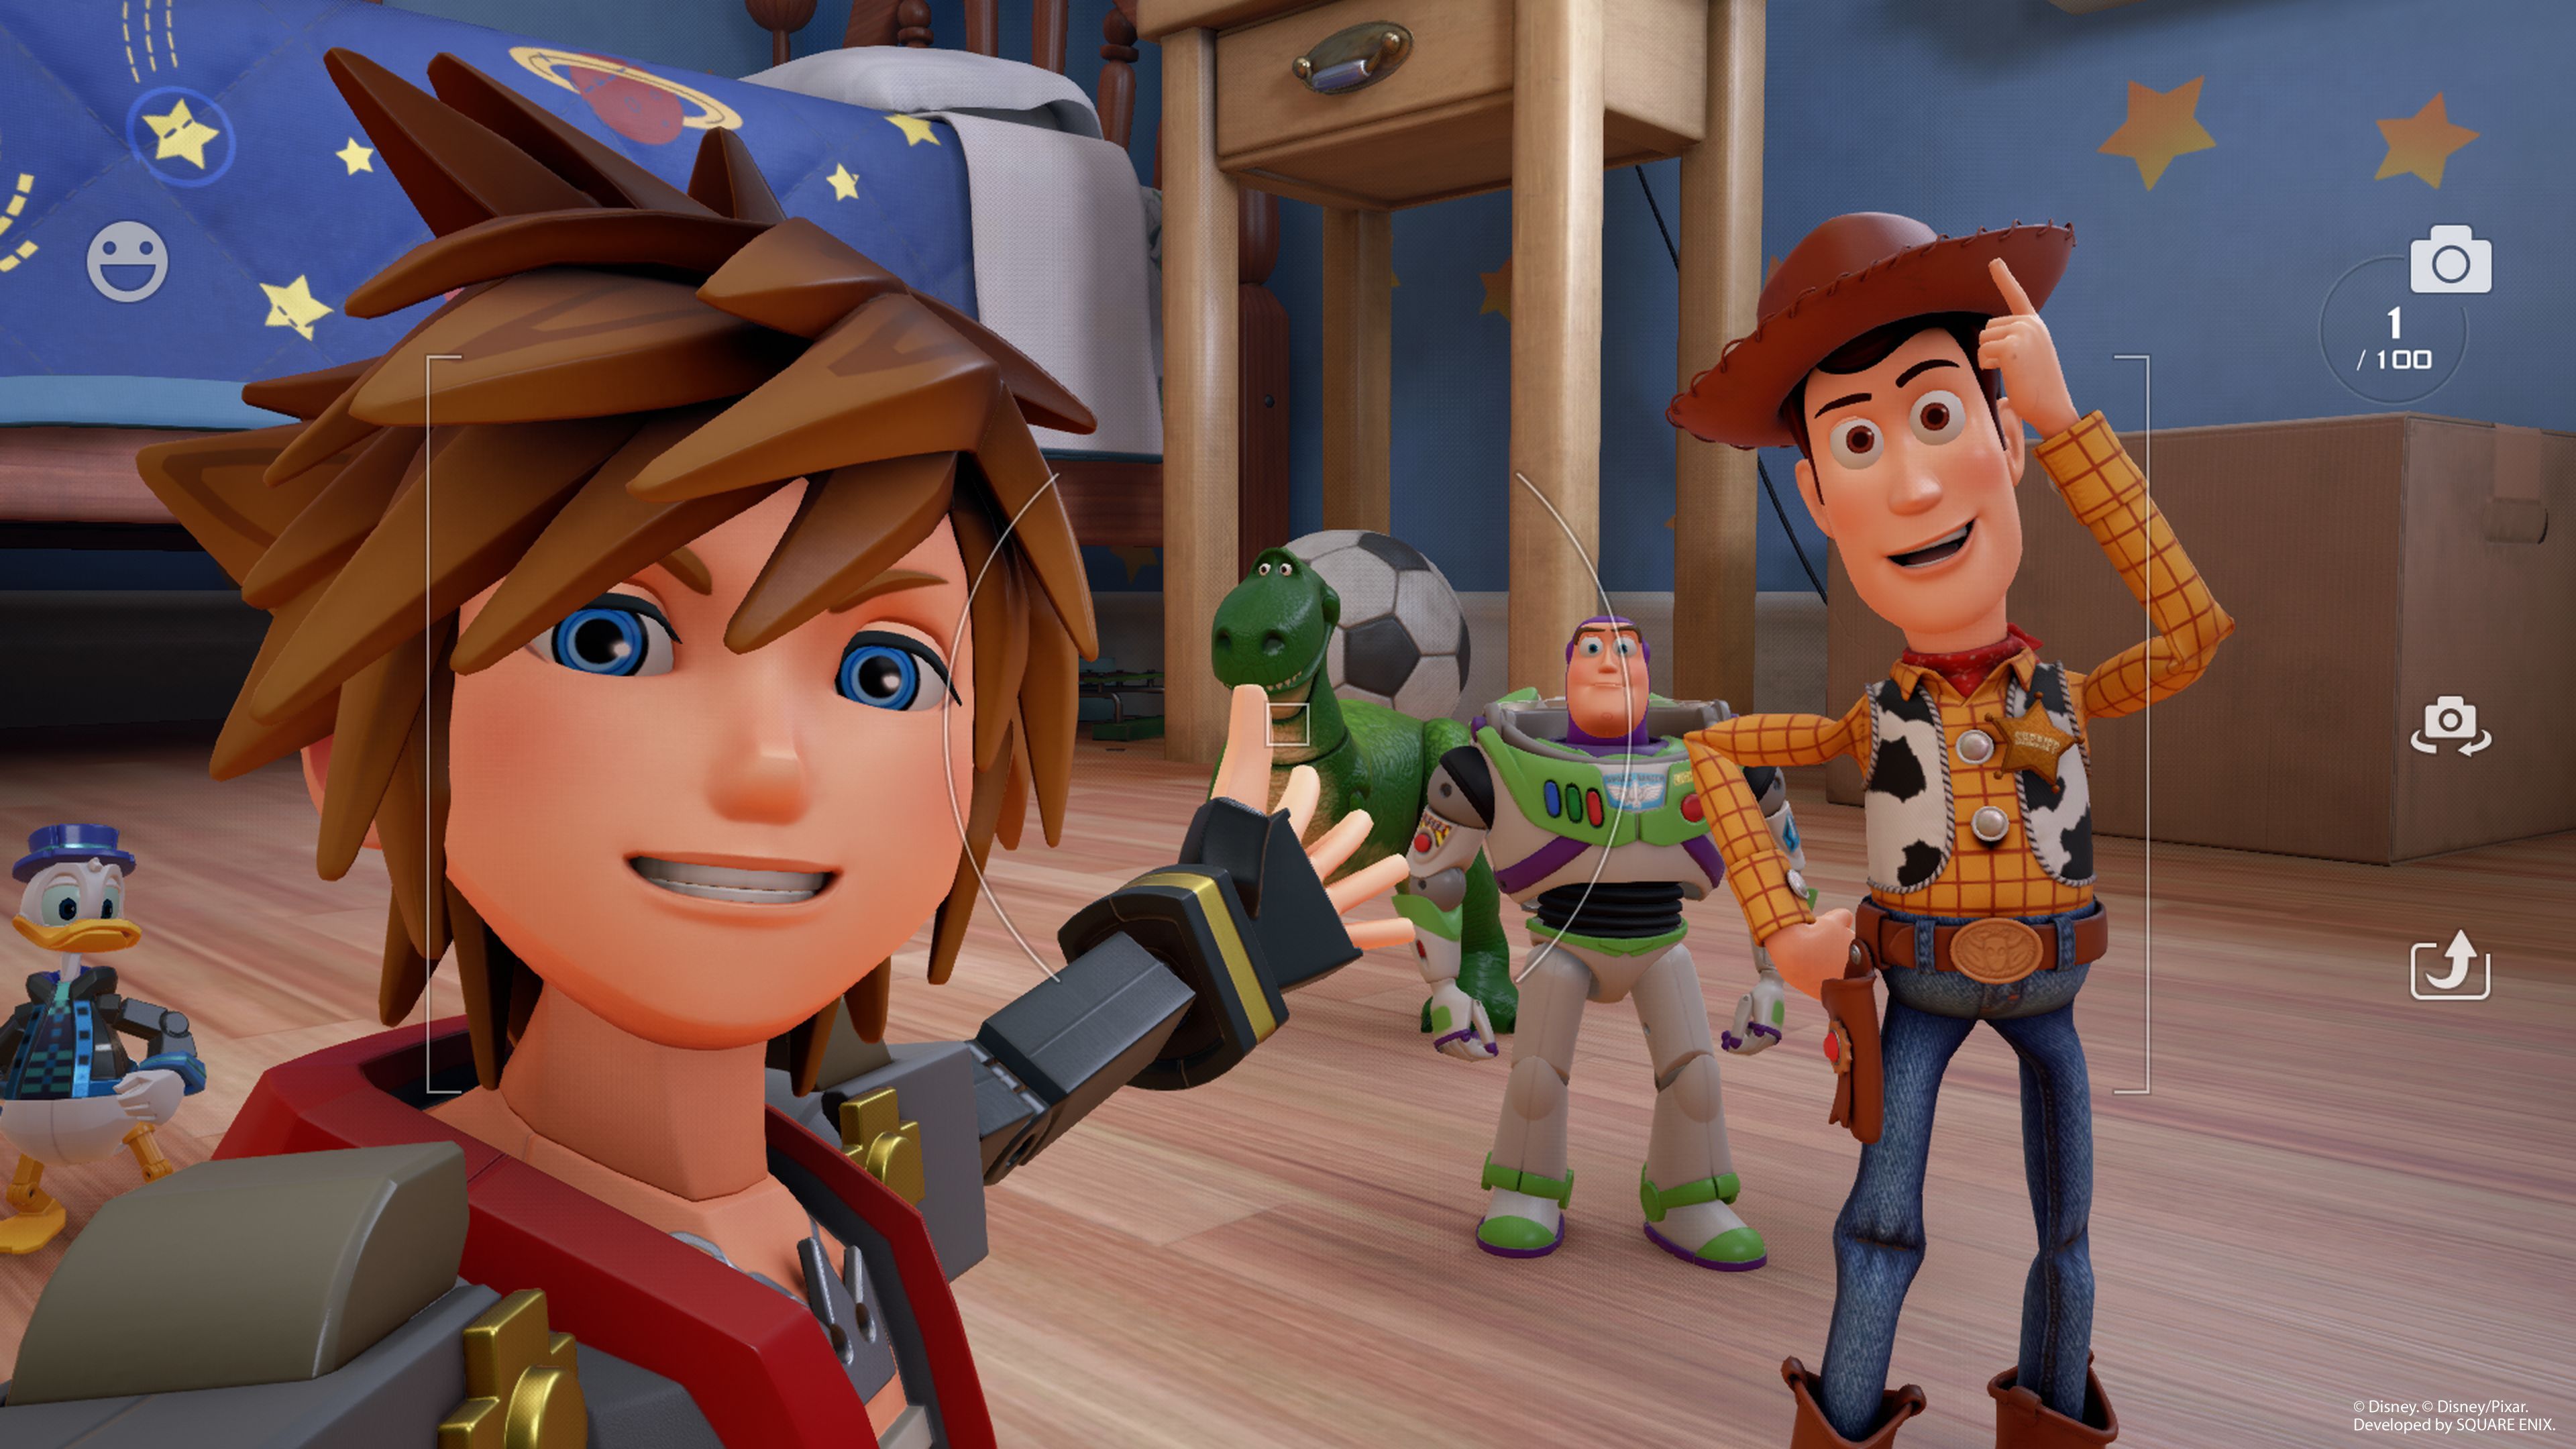 Kingdom Hearts 3 Never Would Have Happened Without Toy Story